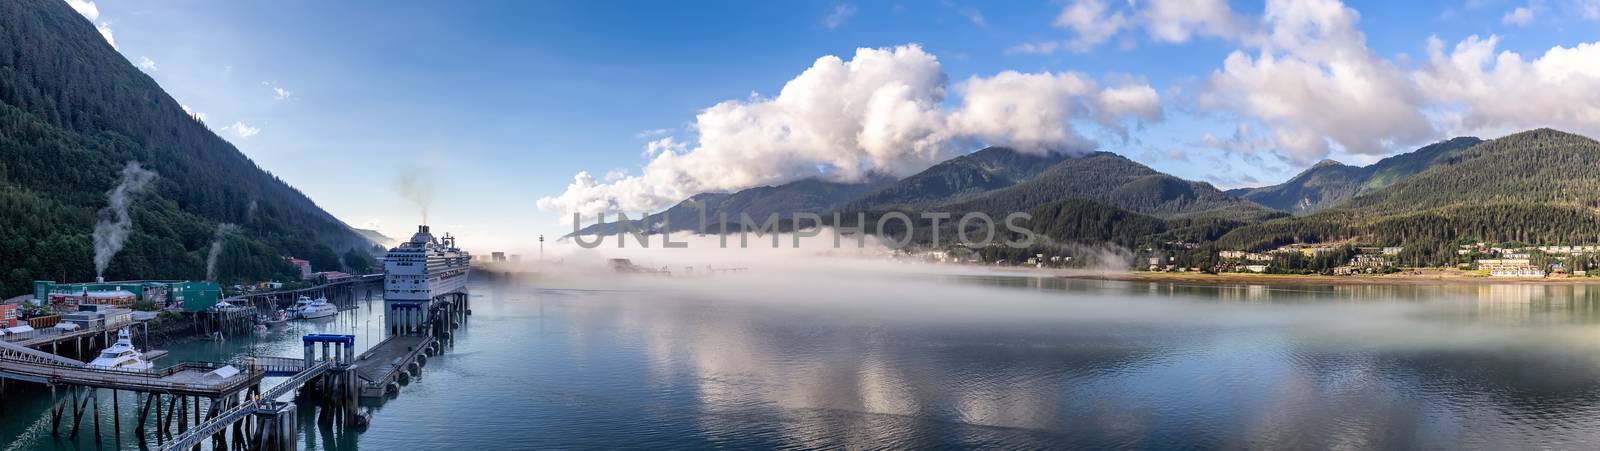 Panoramic shot of port of Juneau and mountains covered with clouds and fog in Gastineau Channel, Alaska. Cruise ship and boats docked in the port. Blue cloudy sky as a background.